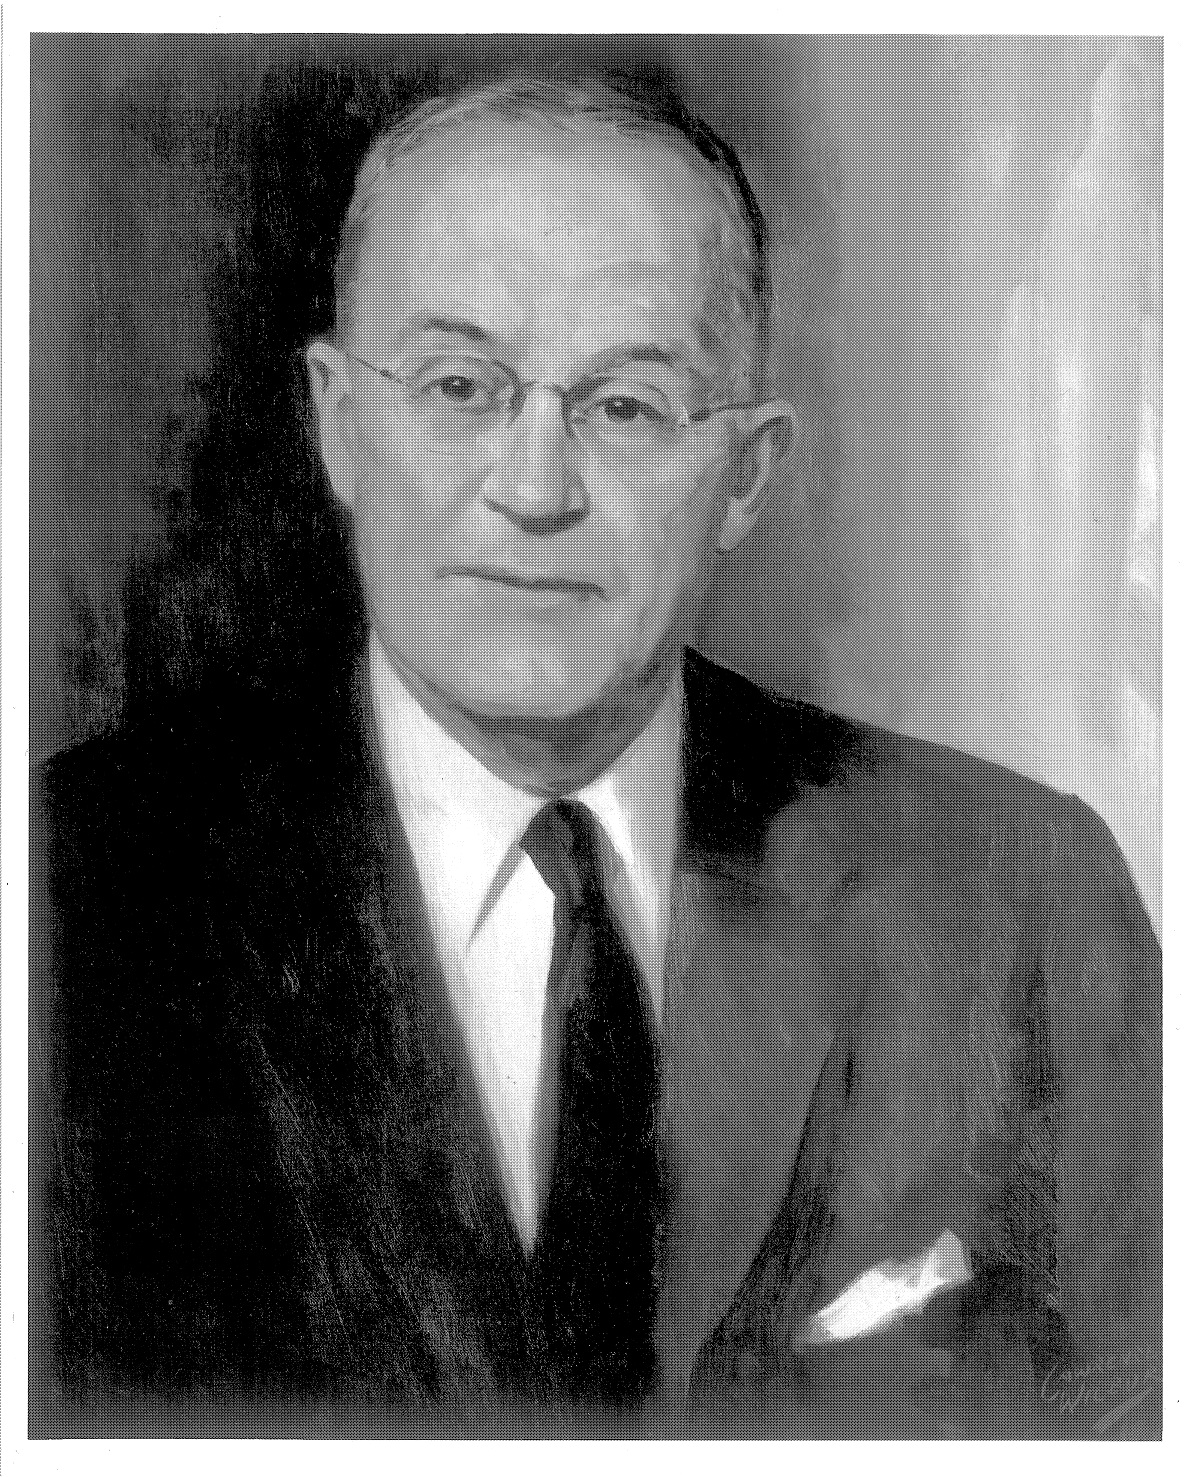 In 1947, NJHA hired J. Harold Johnston as the Association’s first full-time executive.